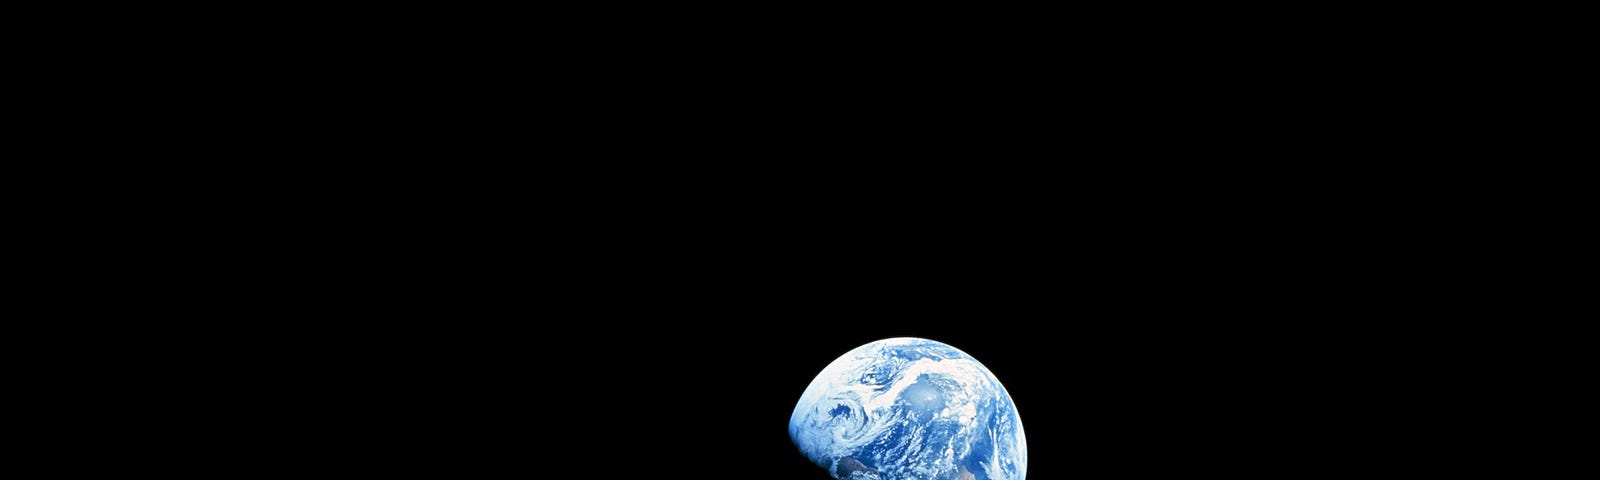 A photograph of Earth and some of the Moon’s surface that was taken from lunar orbit by astronaut William Anders on December 24, 1968, during the Apollo 8 mission.